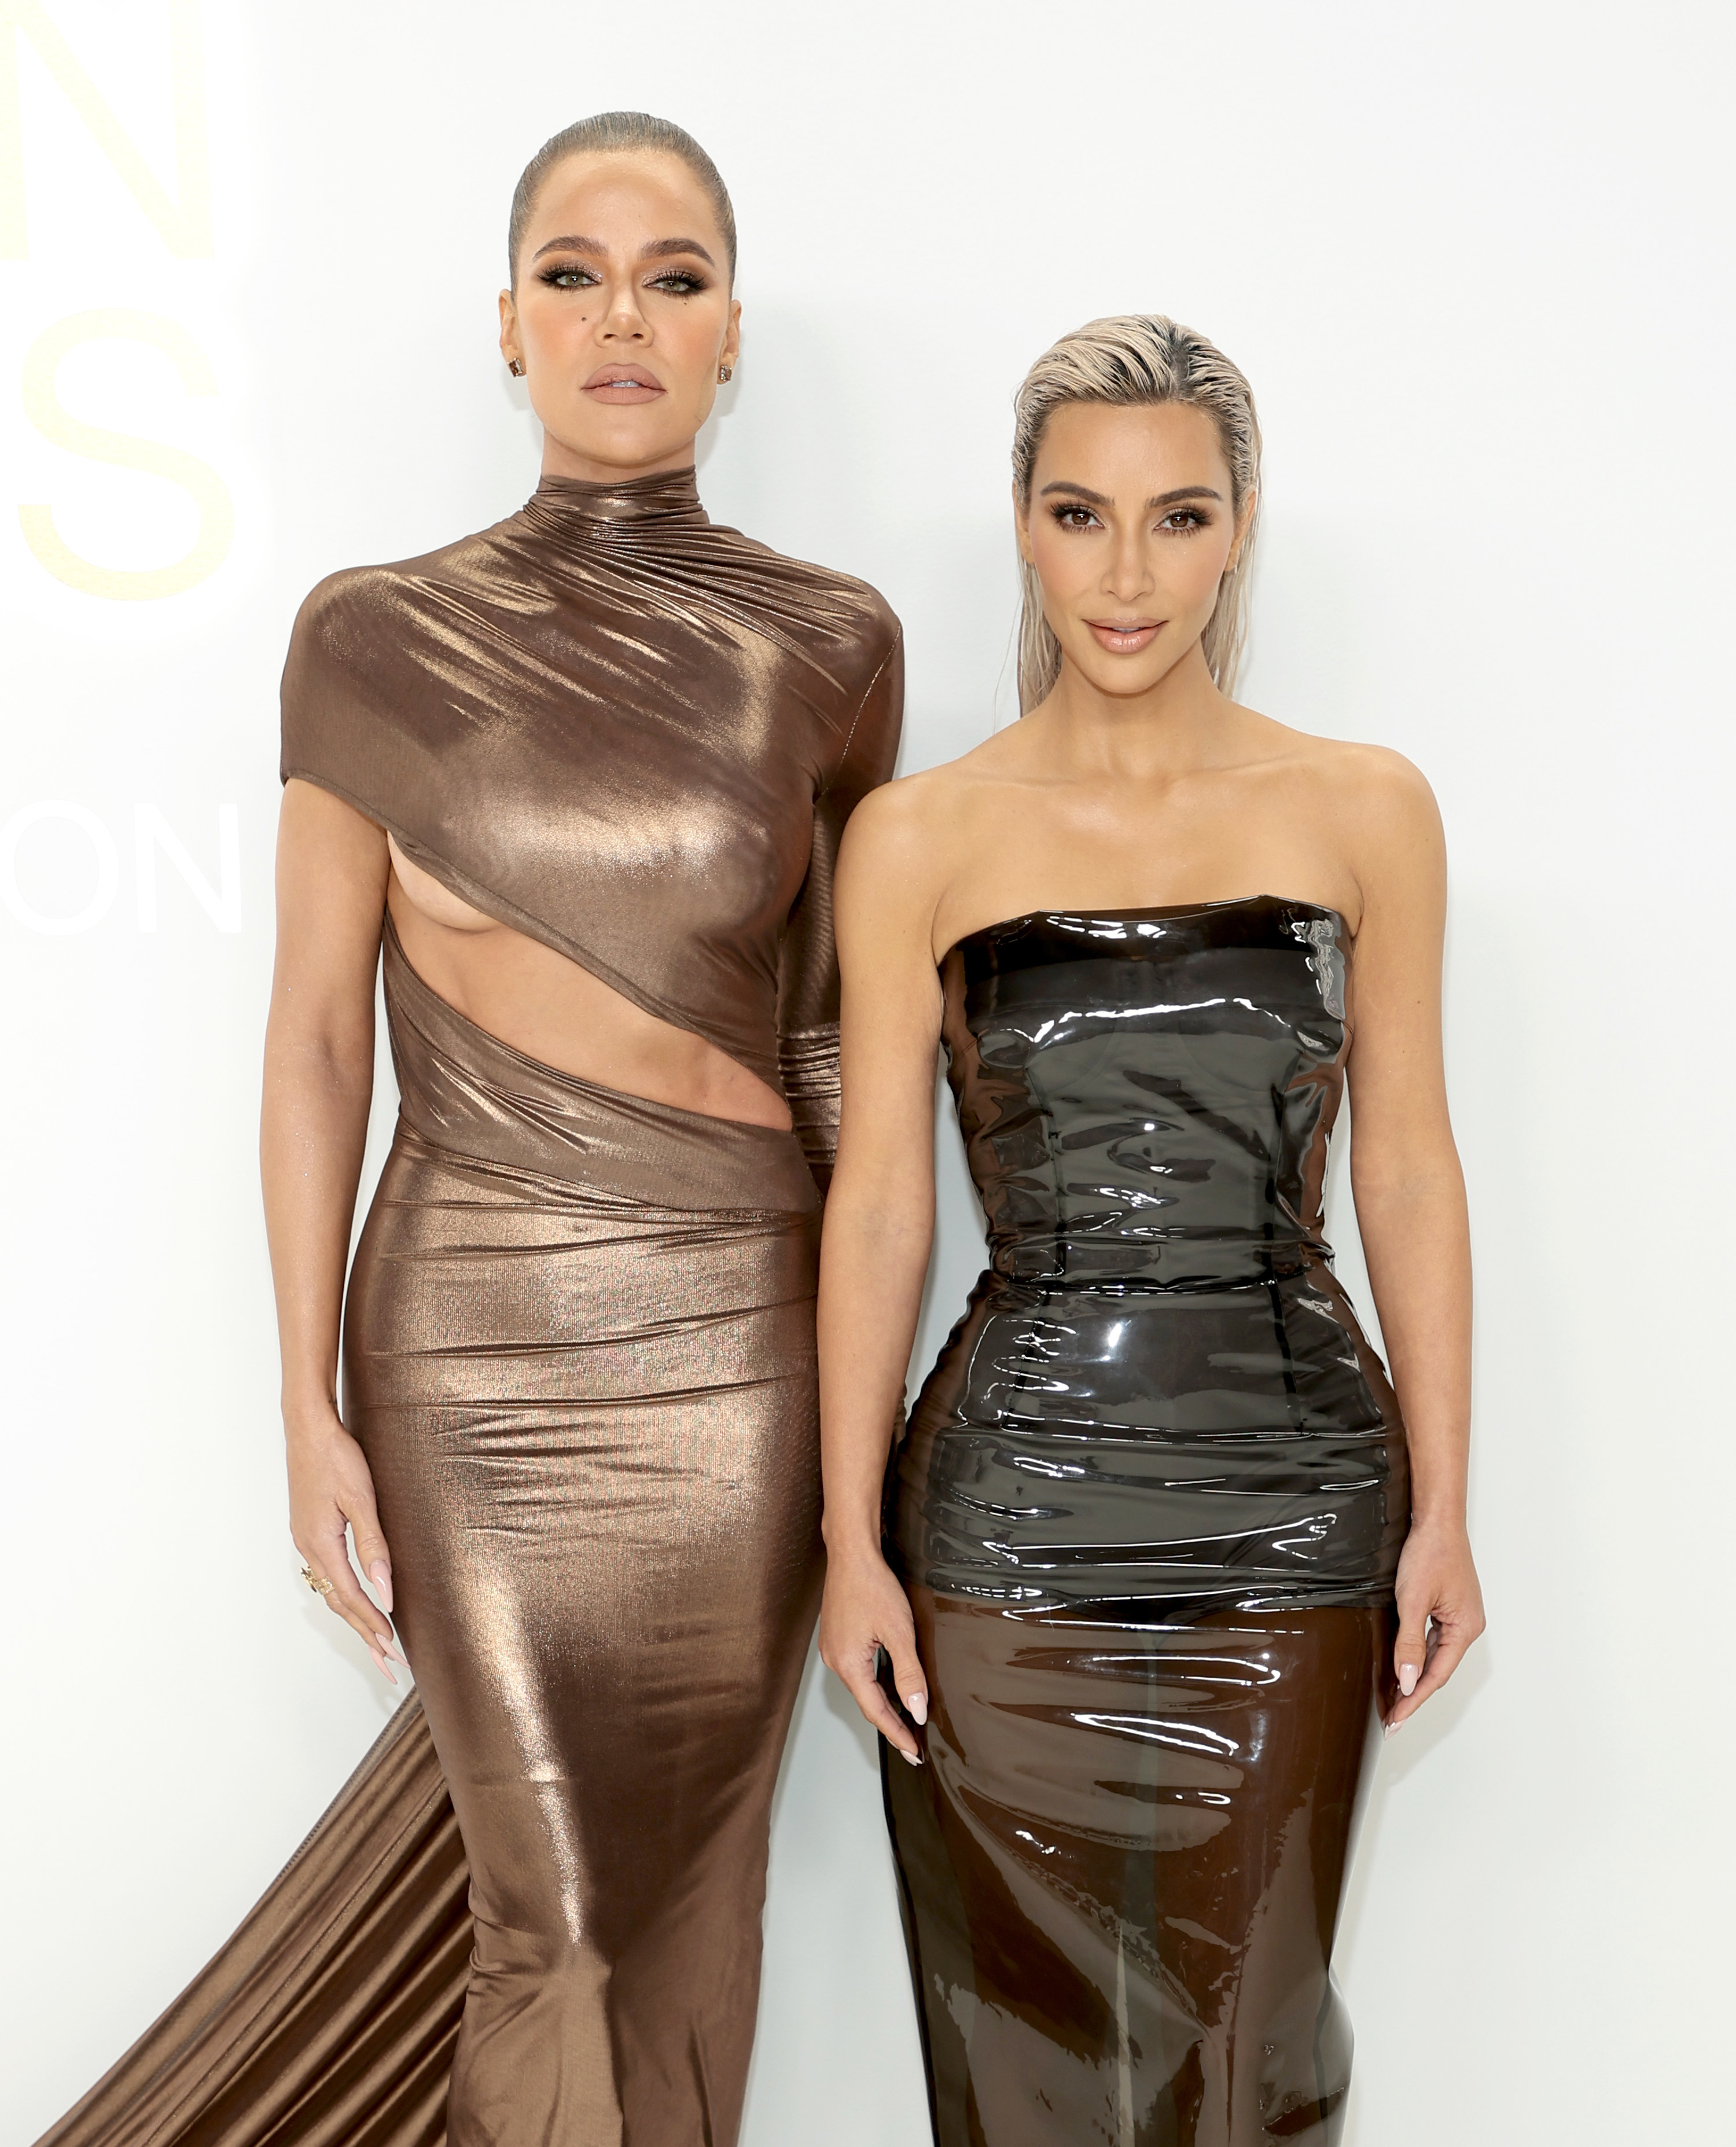 Khloé and Kim standing together in shiny gowns